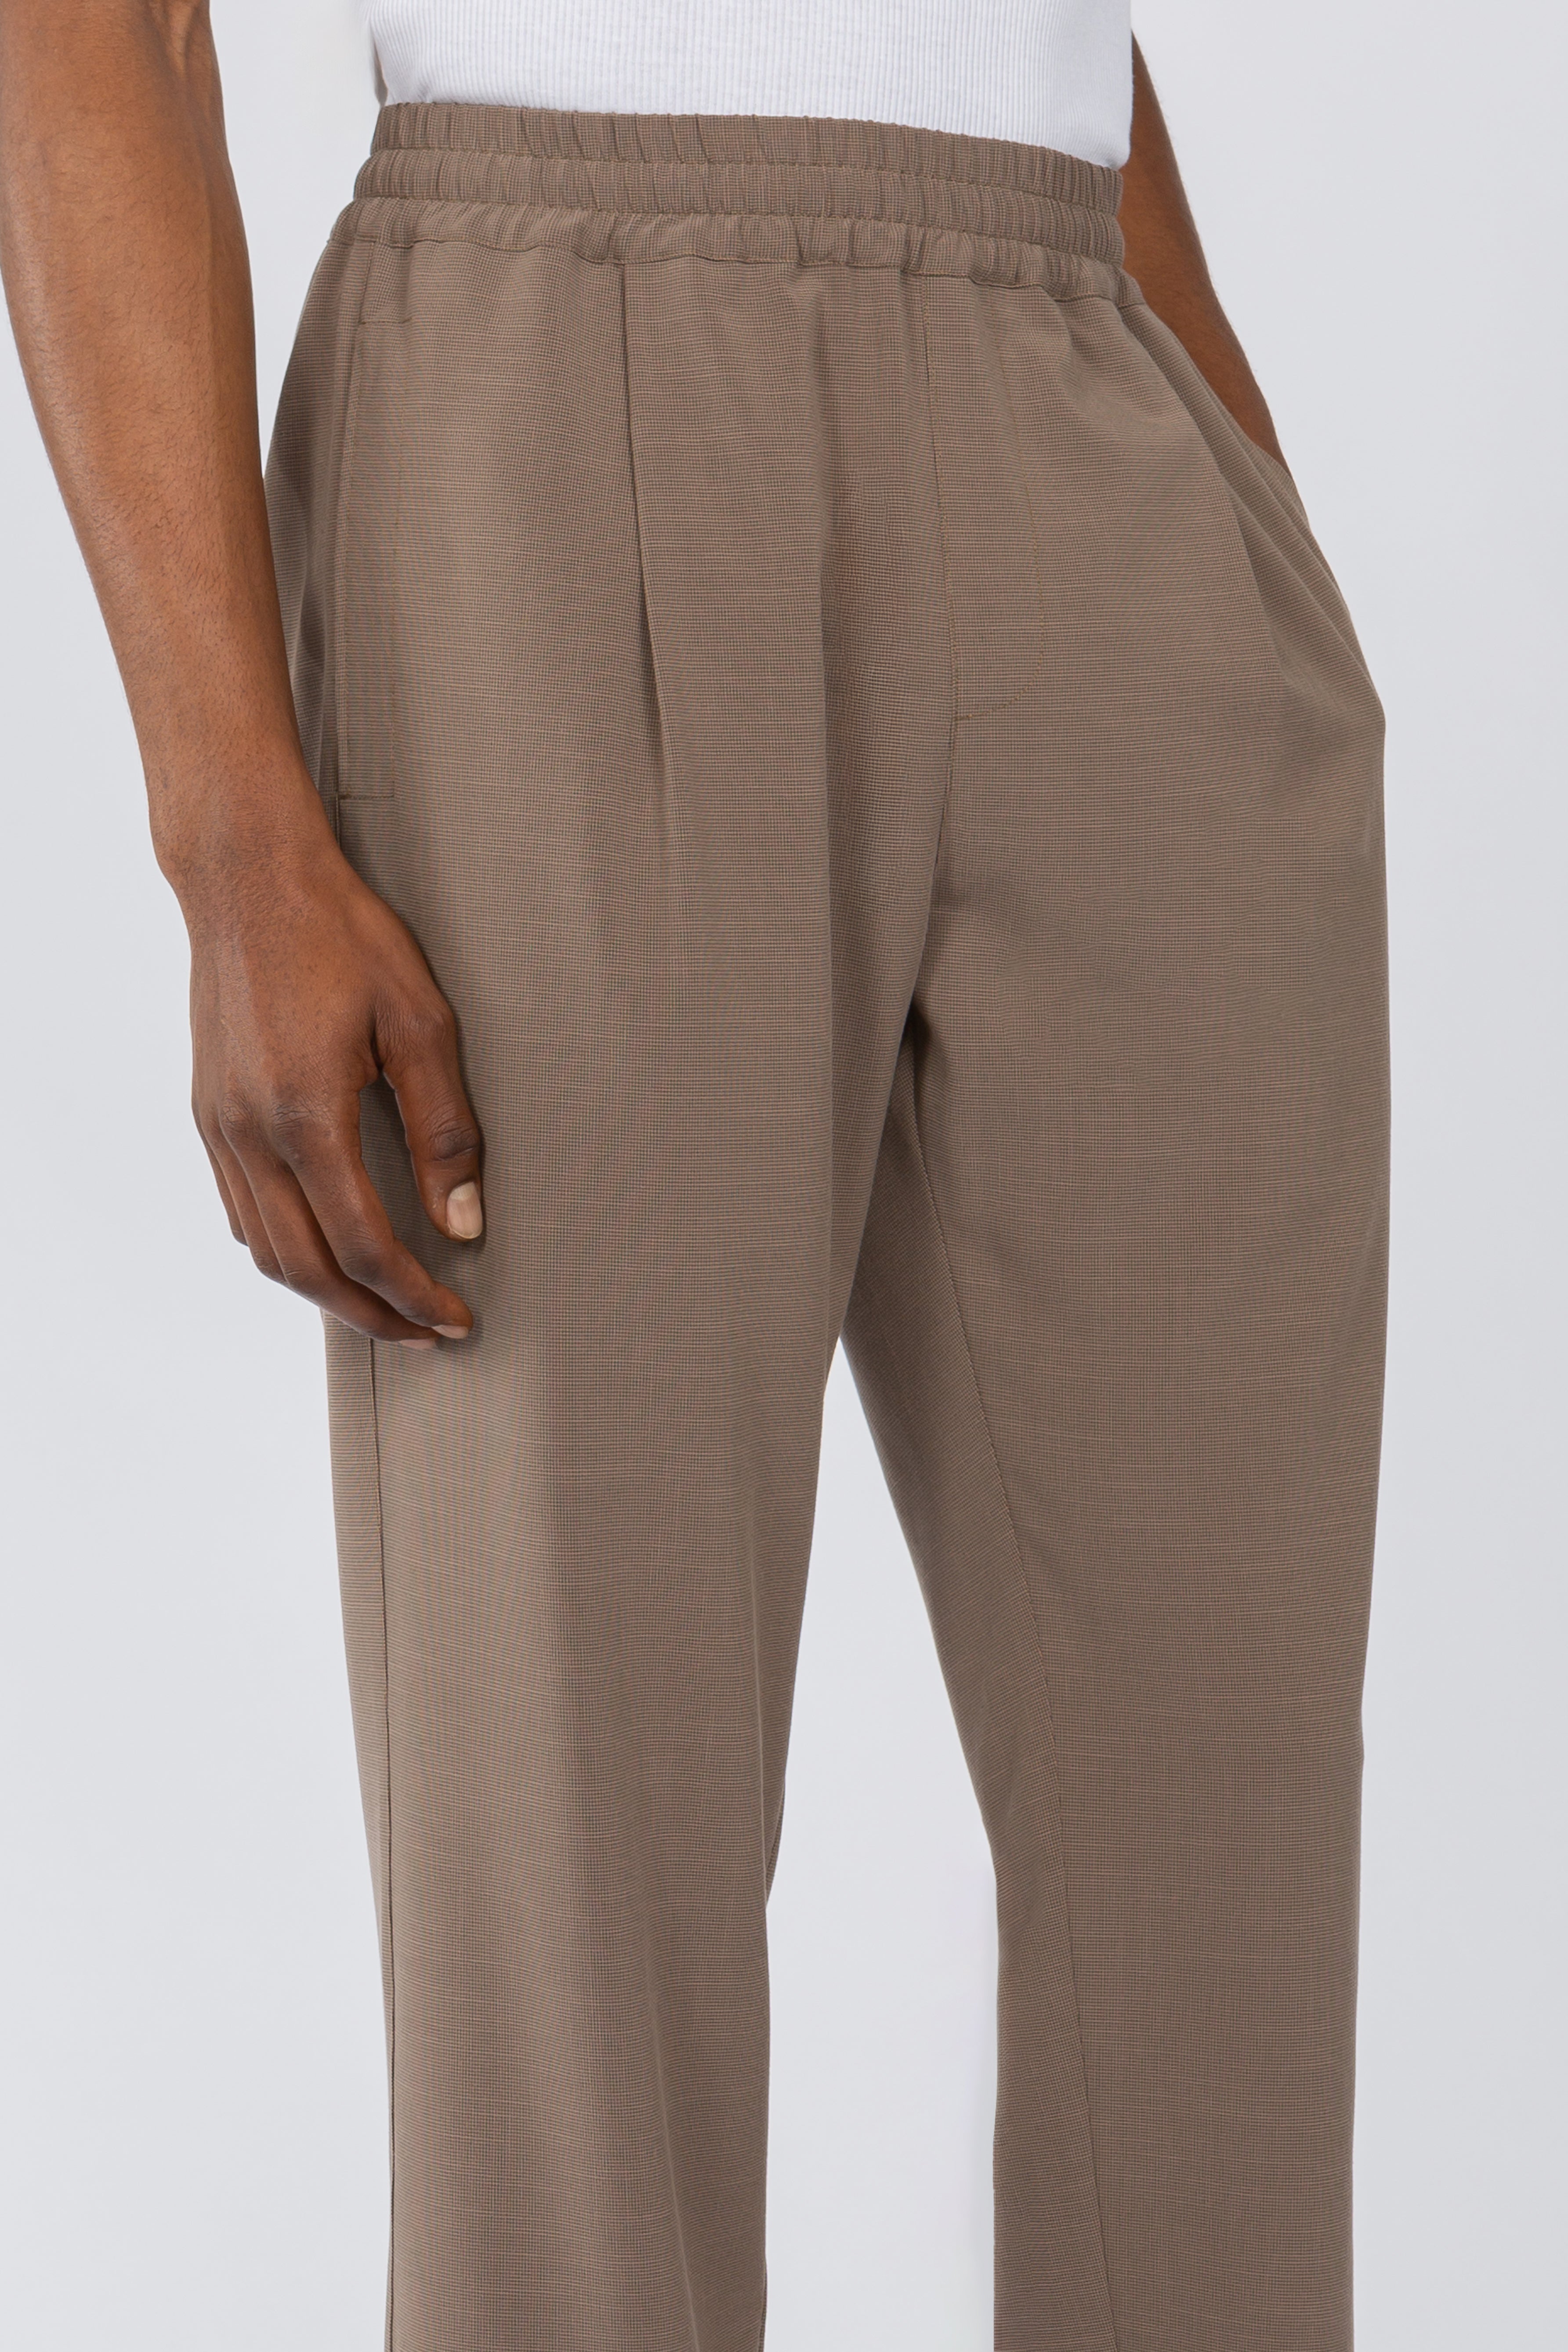 Petite Taupe Pleated Trousers - Petite Archie Pants